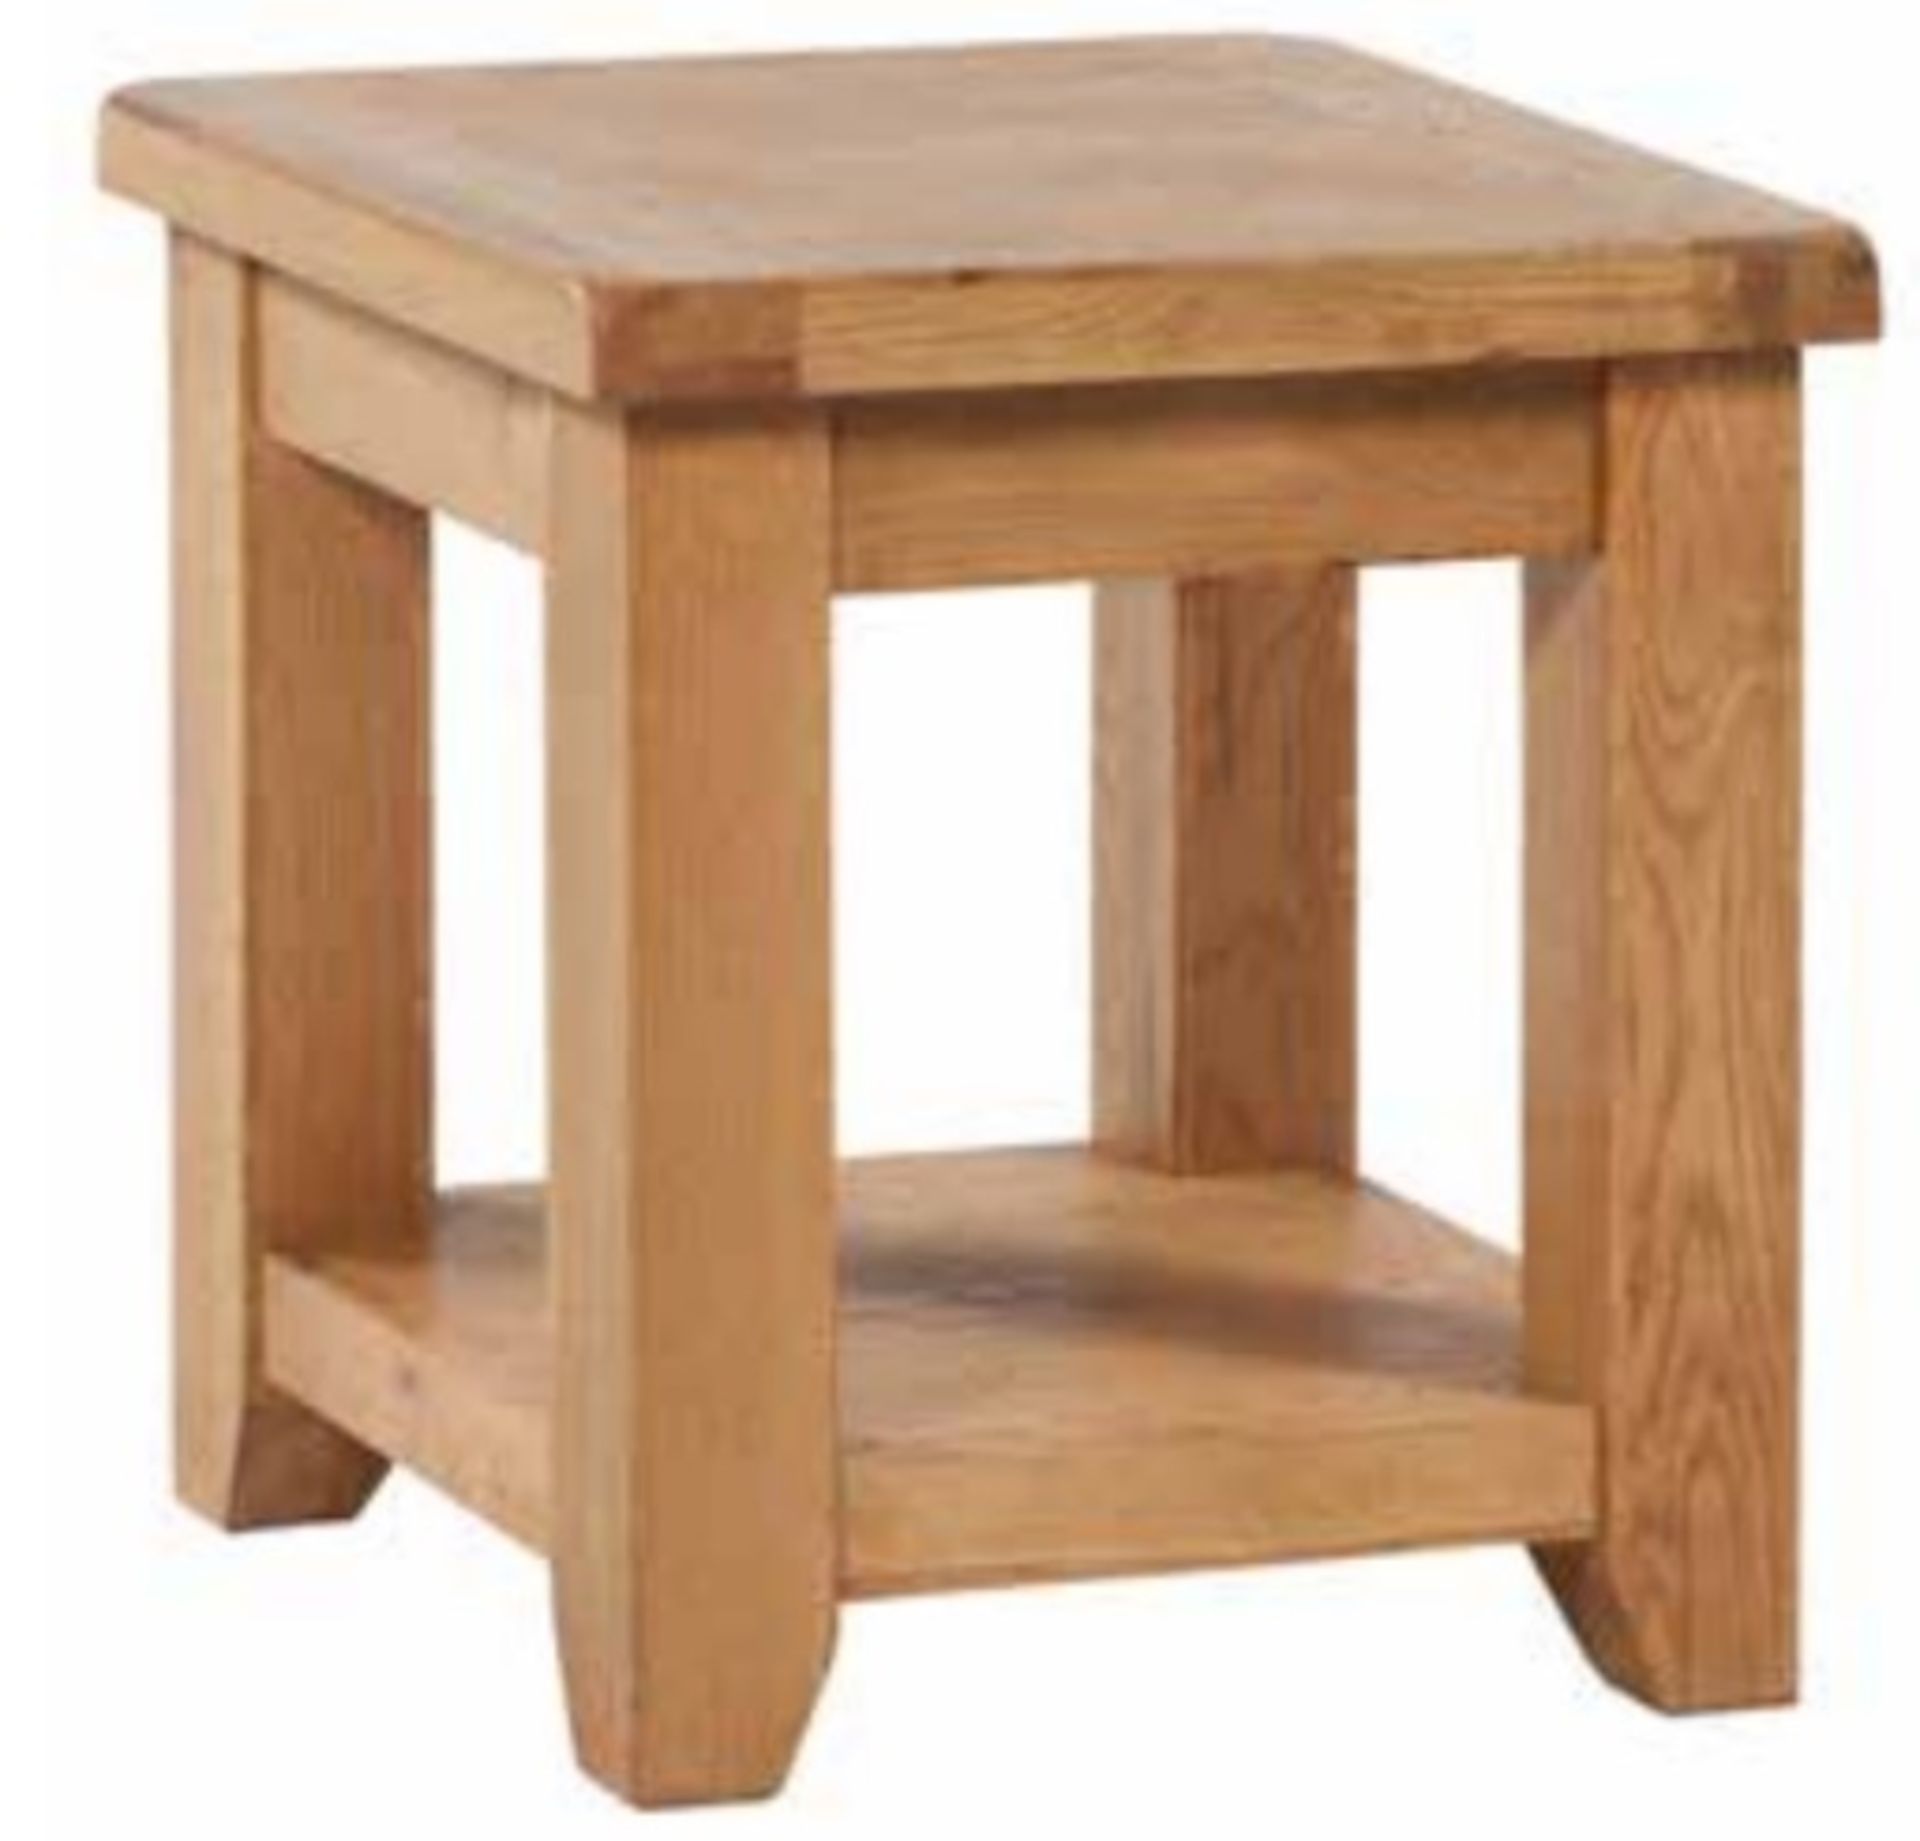 V Brand New Chiswick Oak Side Table 45w x 45d x 50h cms ISP £116.00 (similar at furnituredirectory.